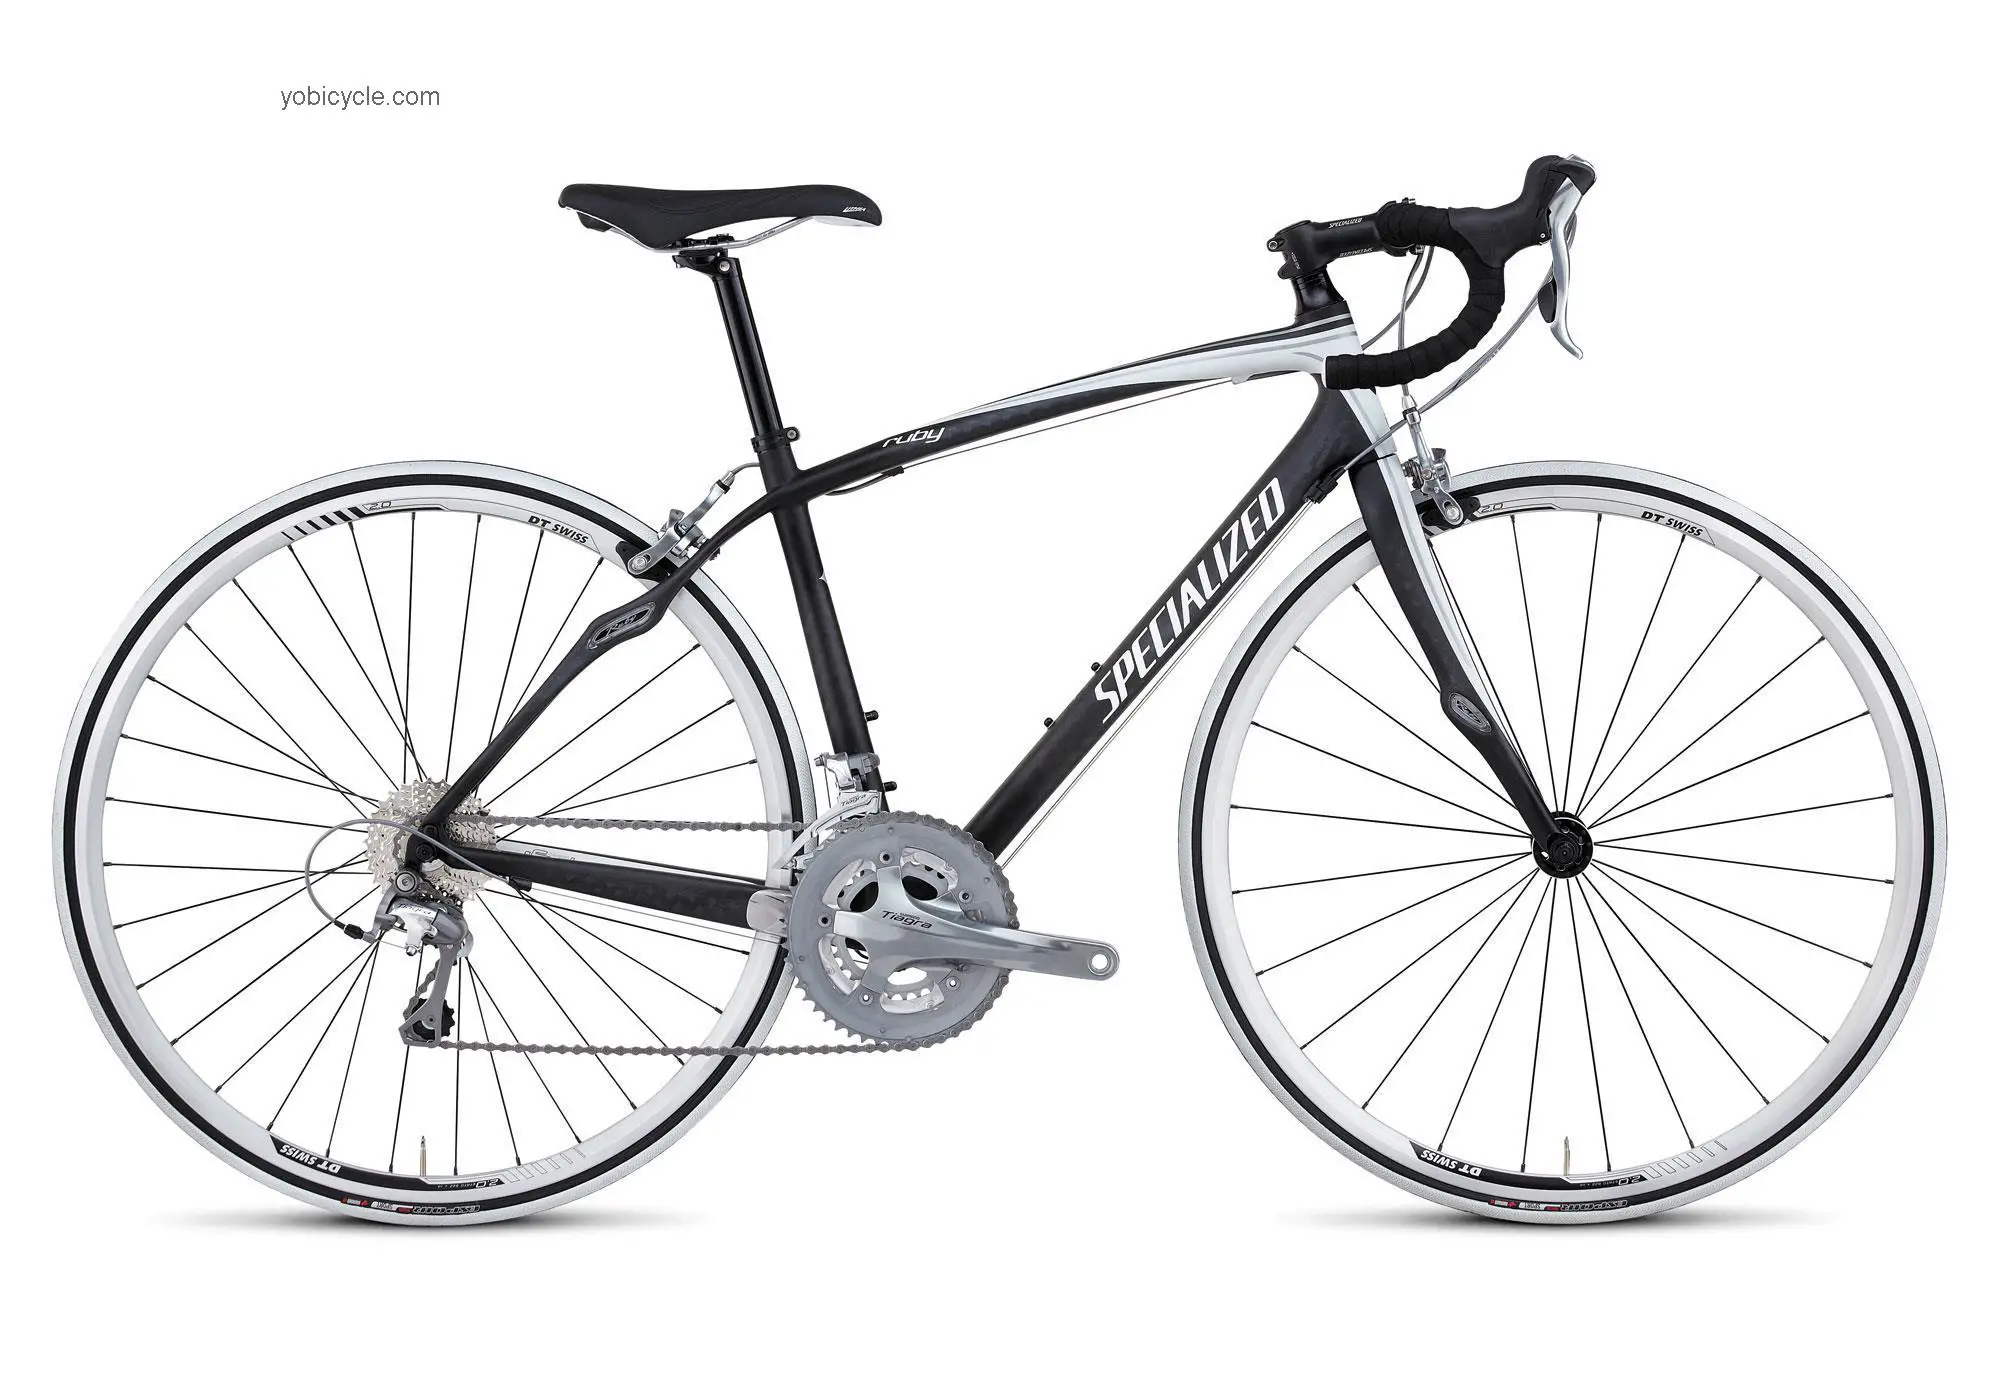 Specialized Ruby Triple 2012 comparison online with competitors